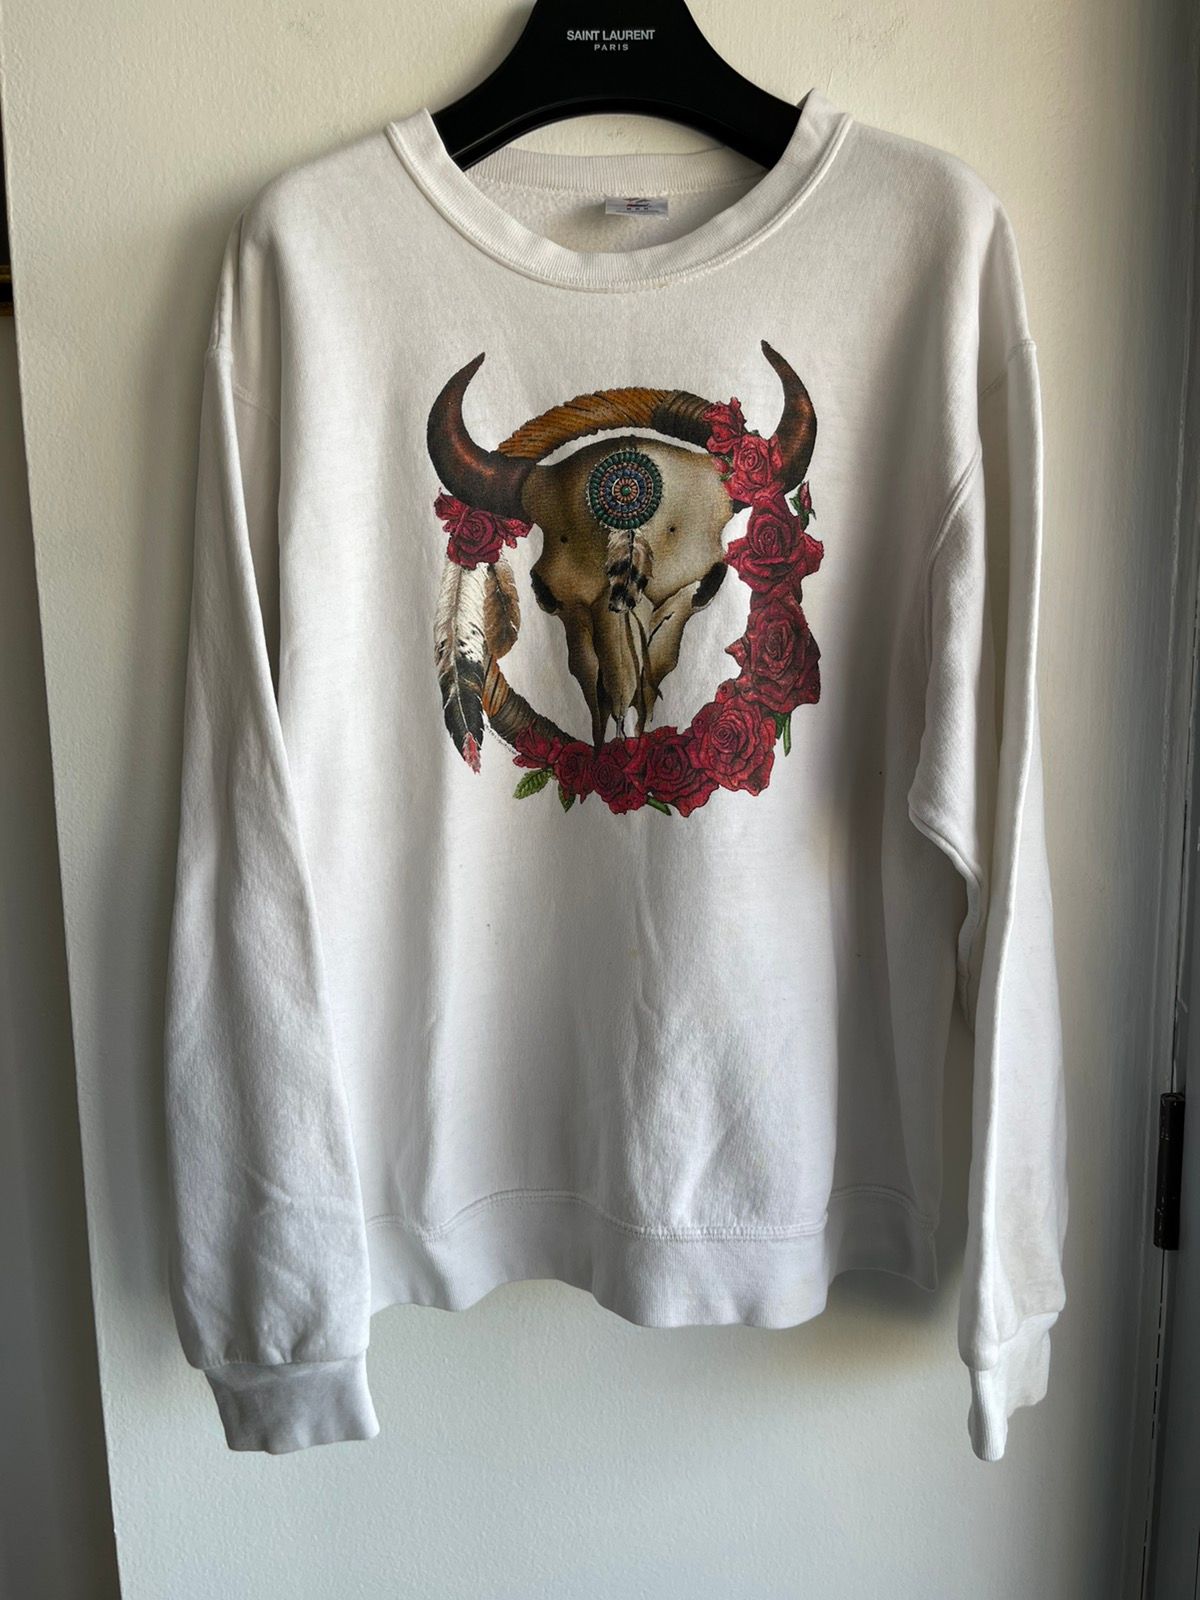 Vintage 90s Skull Feather Rose Sweater Very sick